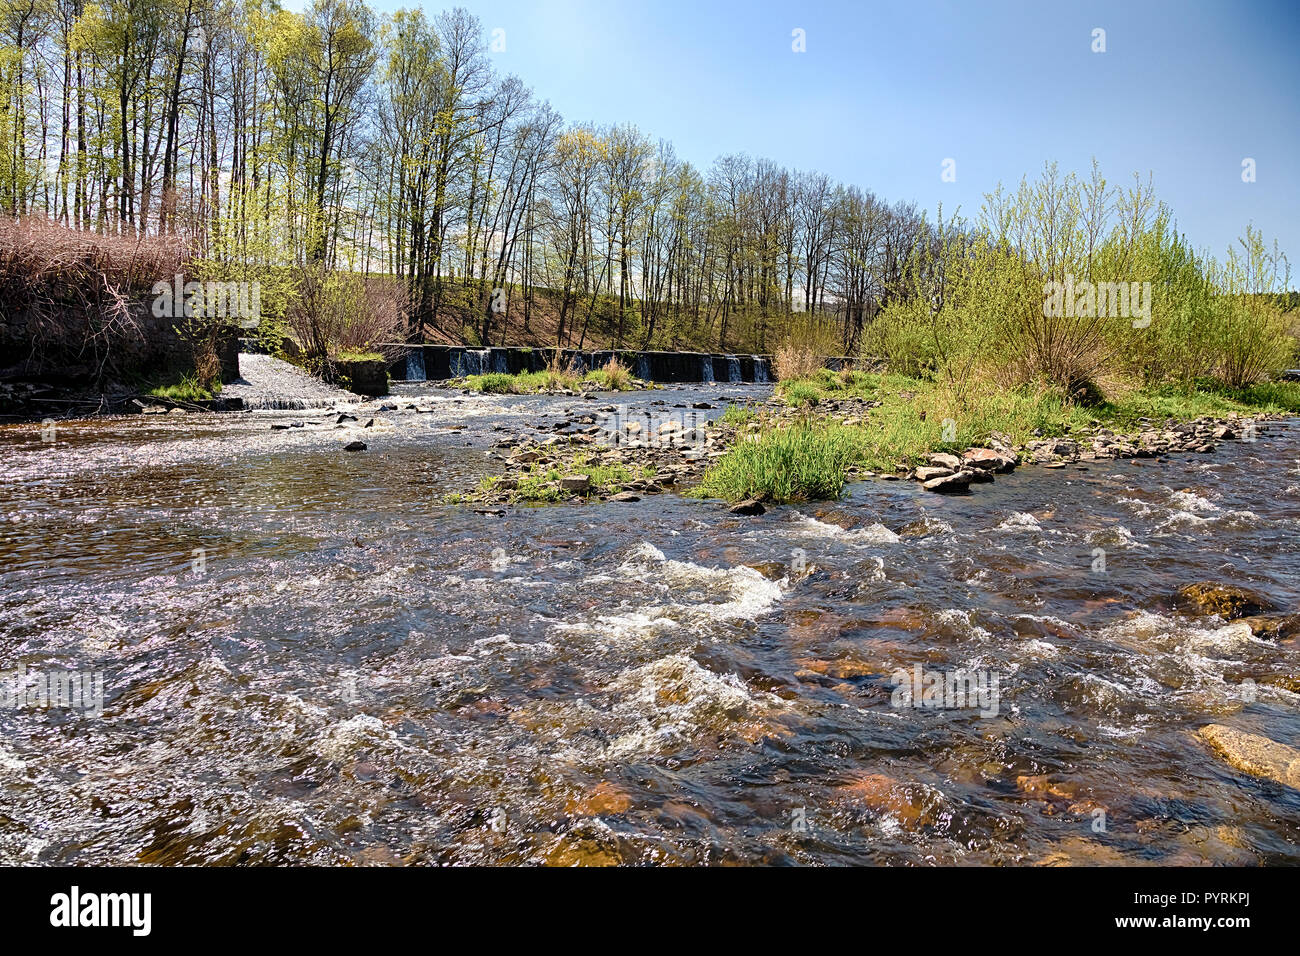 River with the weir runs over boulders Stock Photo